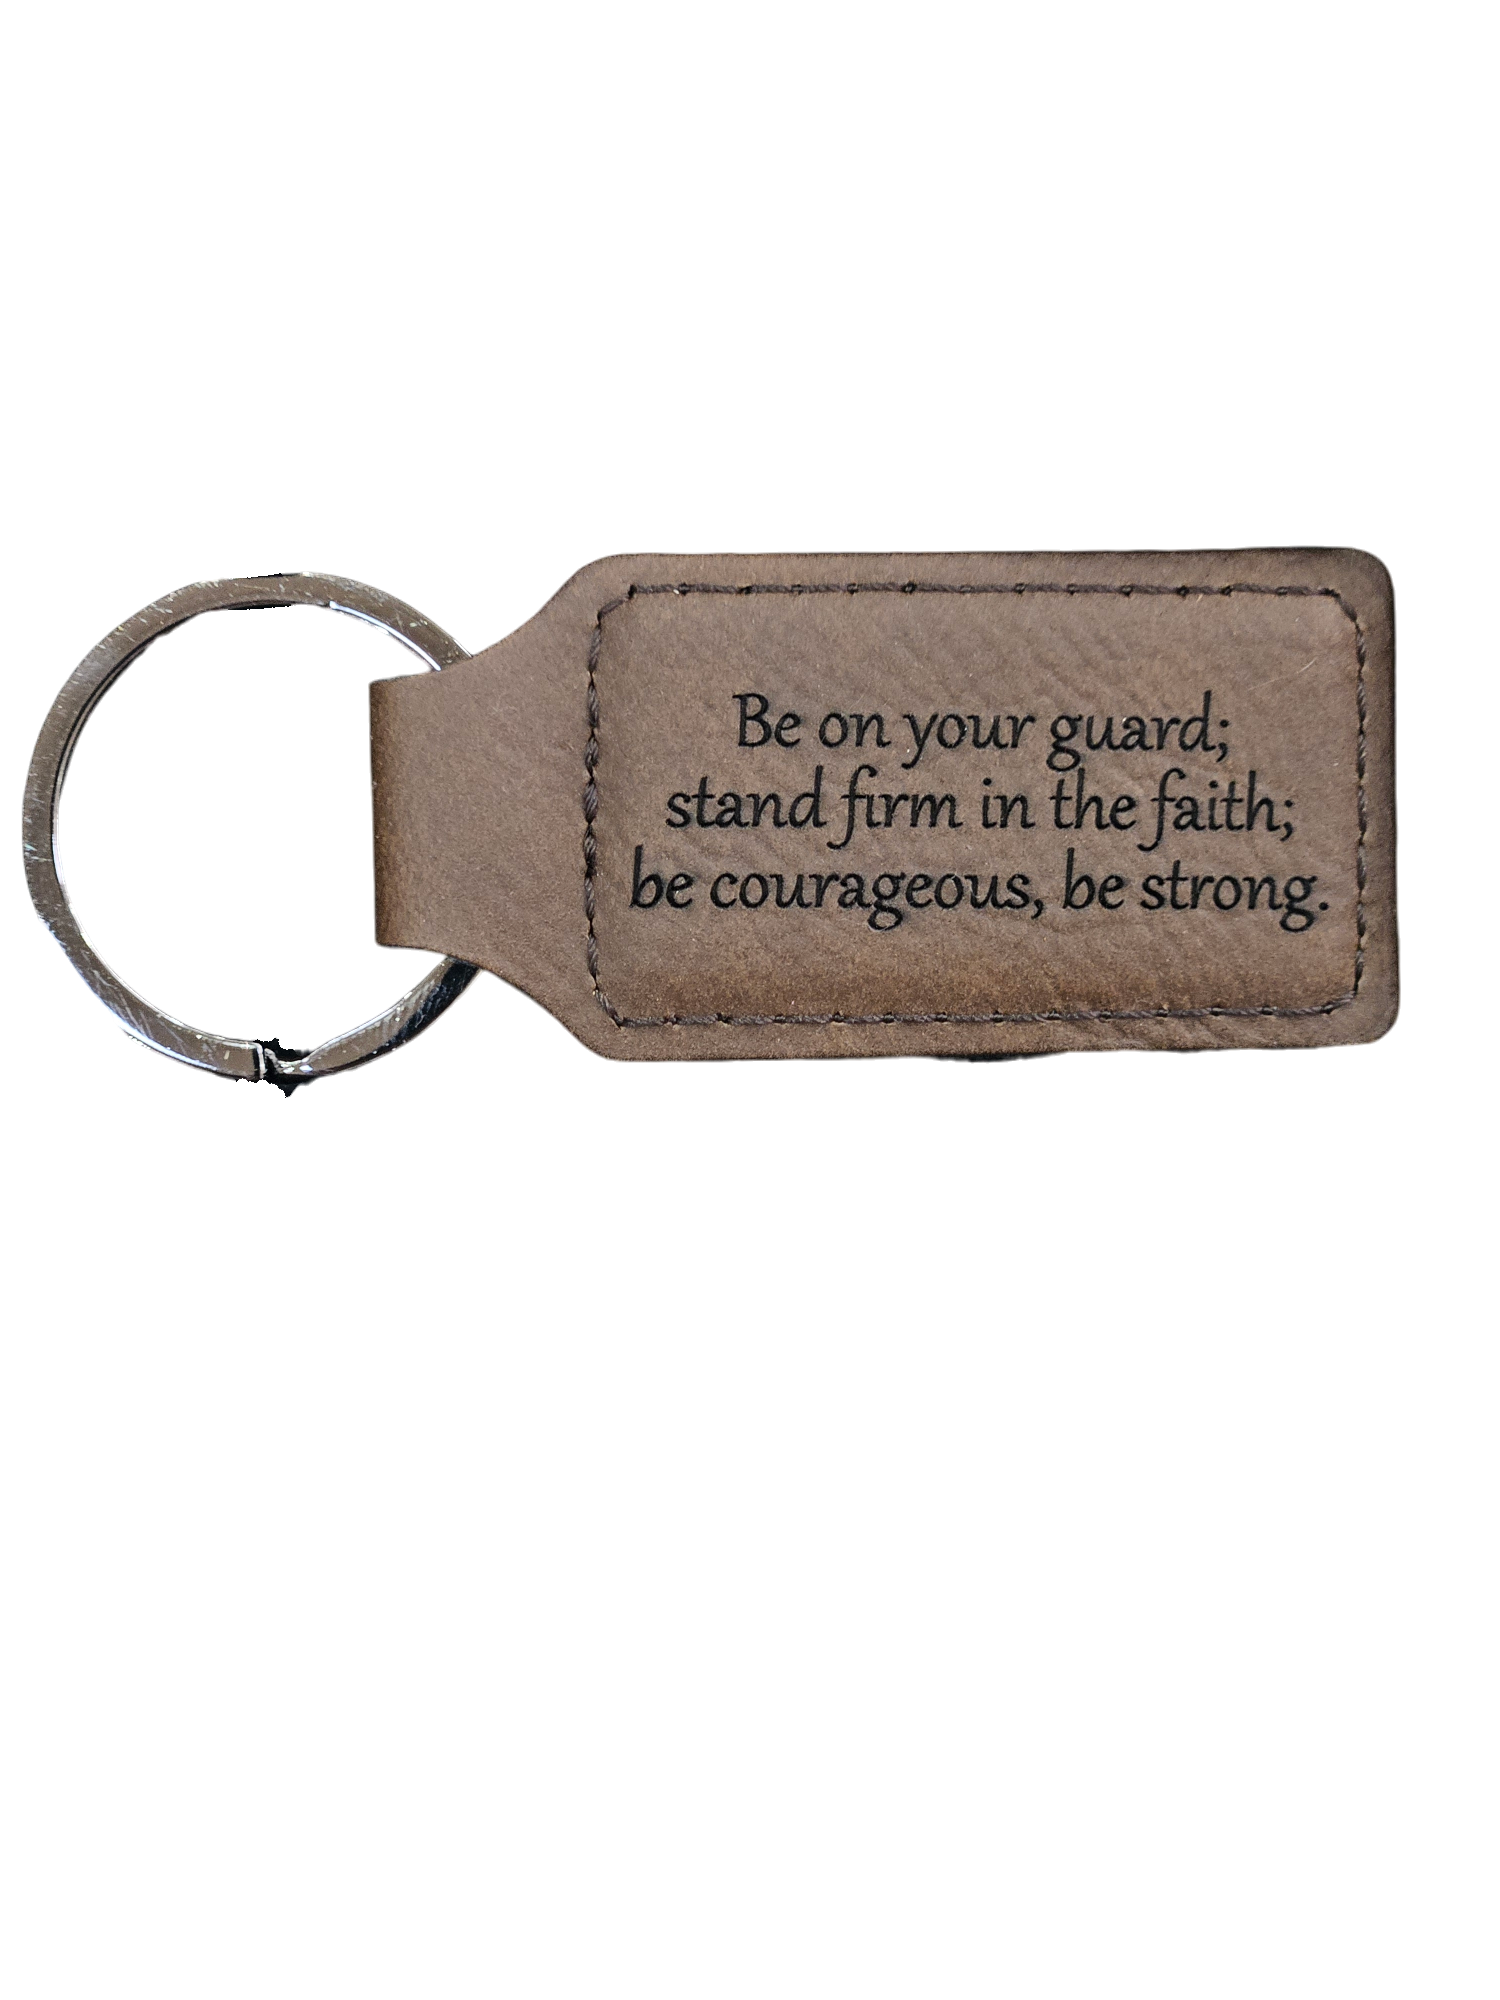 Be on your guard- keychain